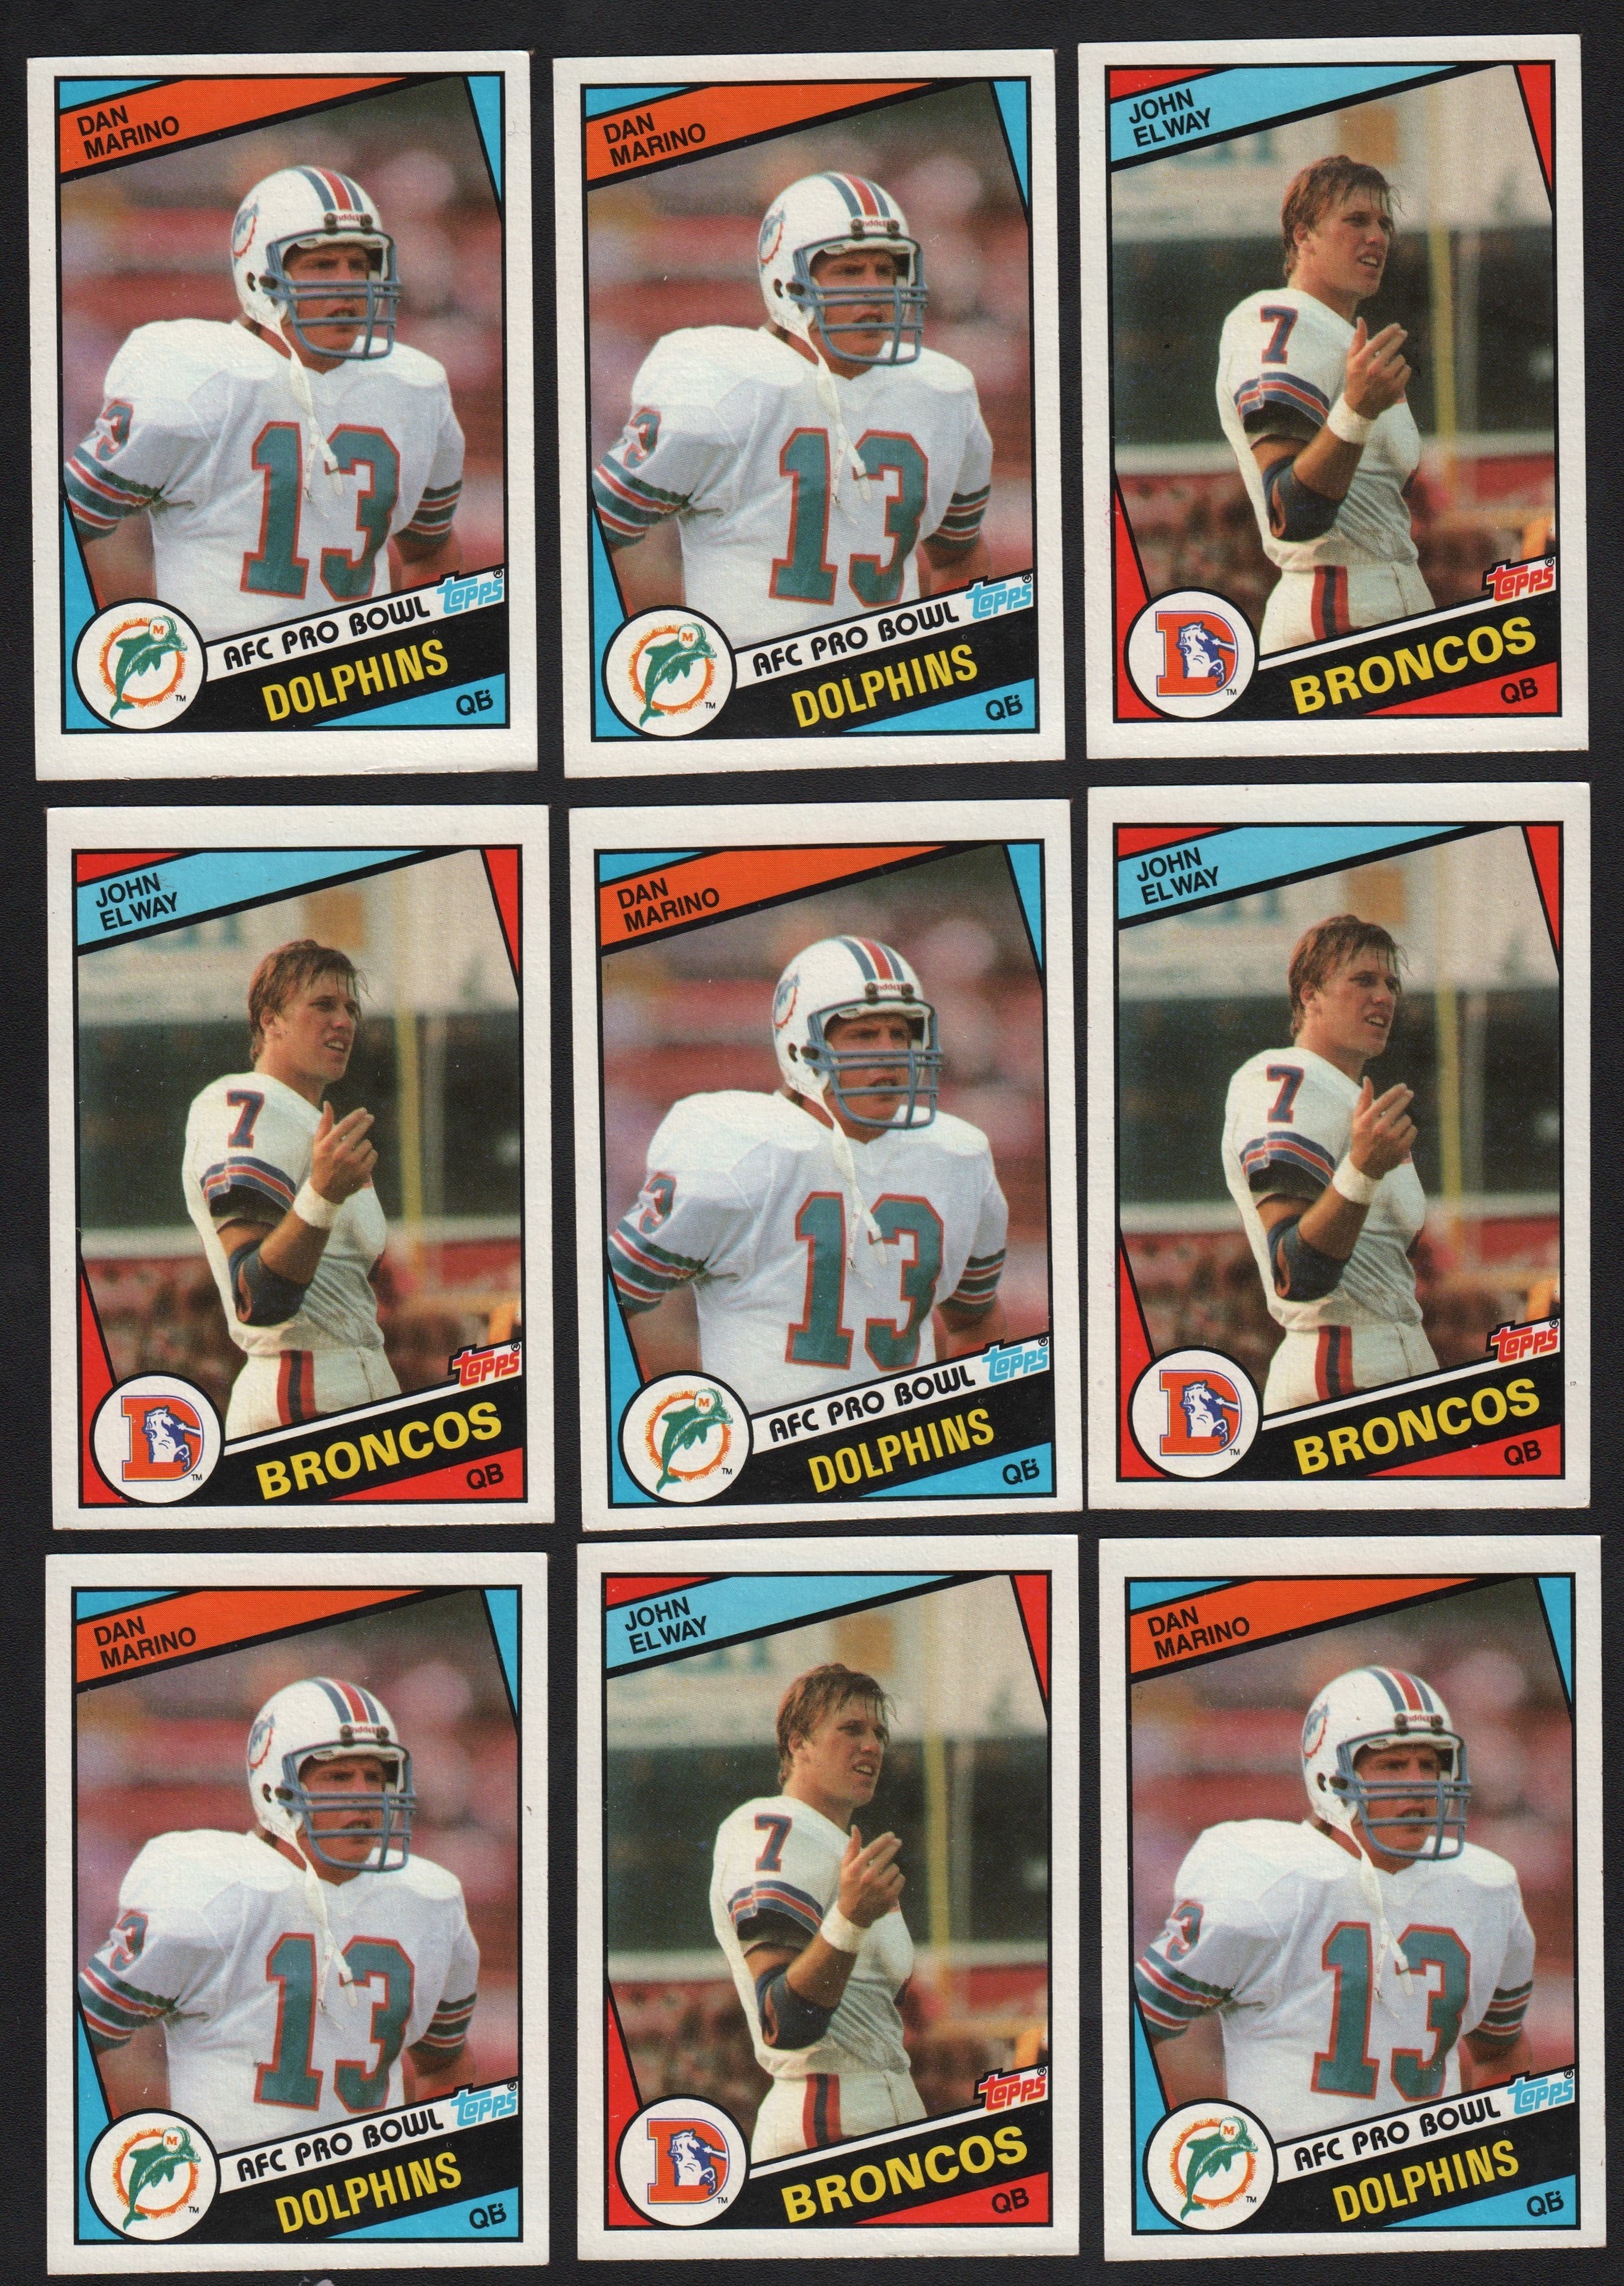 - 1984 Topps Marino (5) and Elway (4) Rookie Cards - all "LONG"